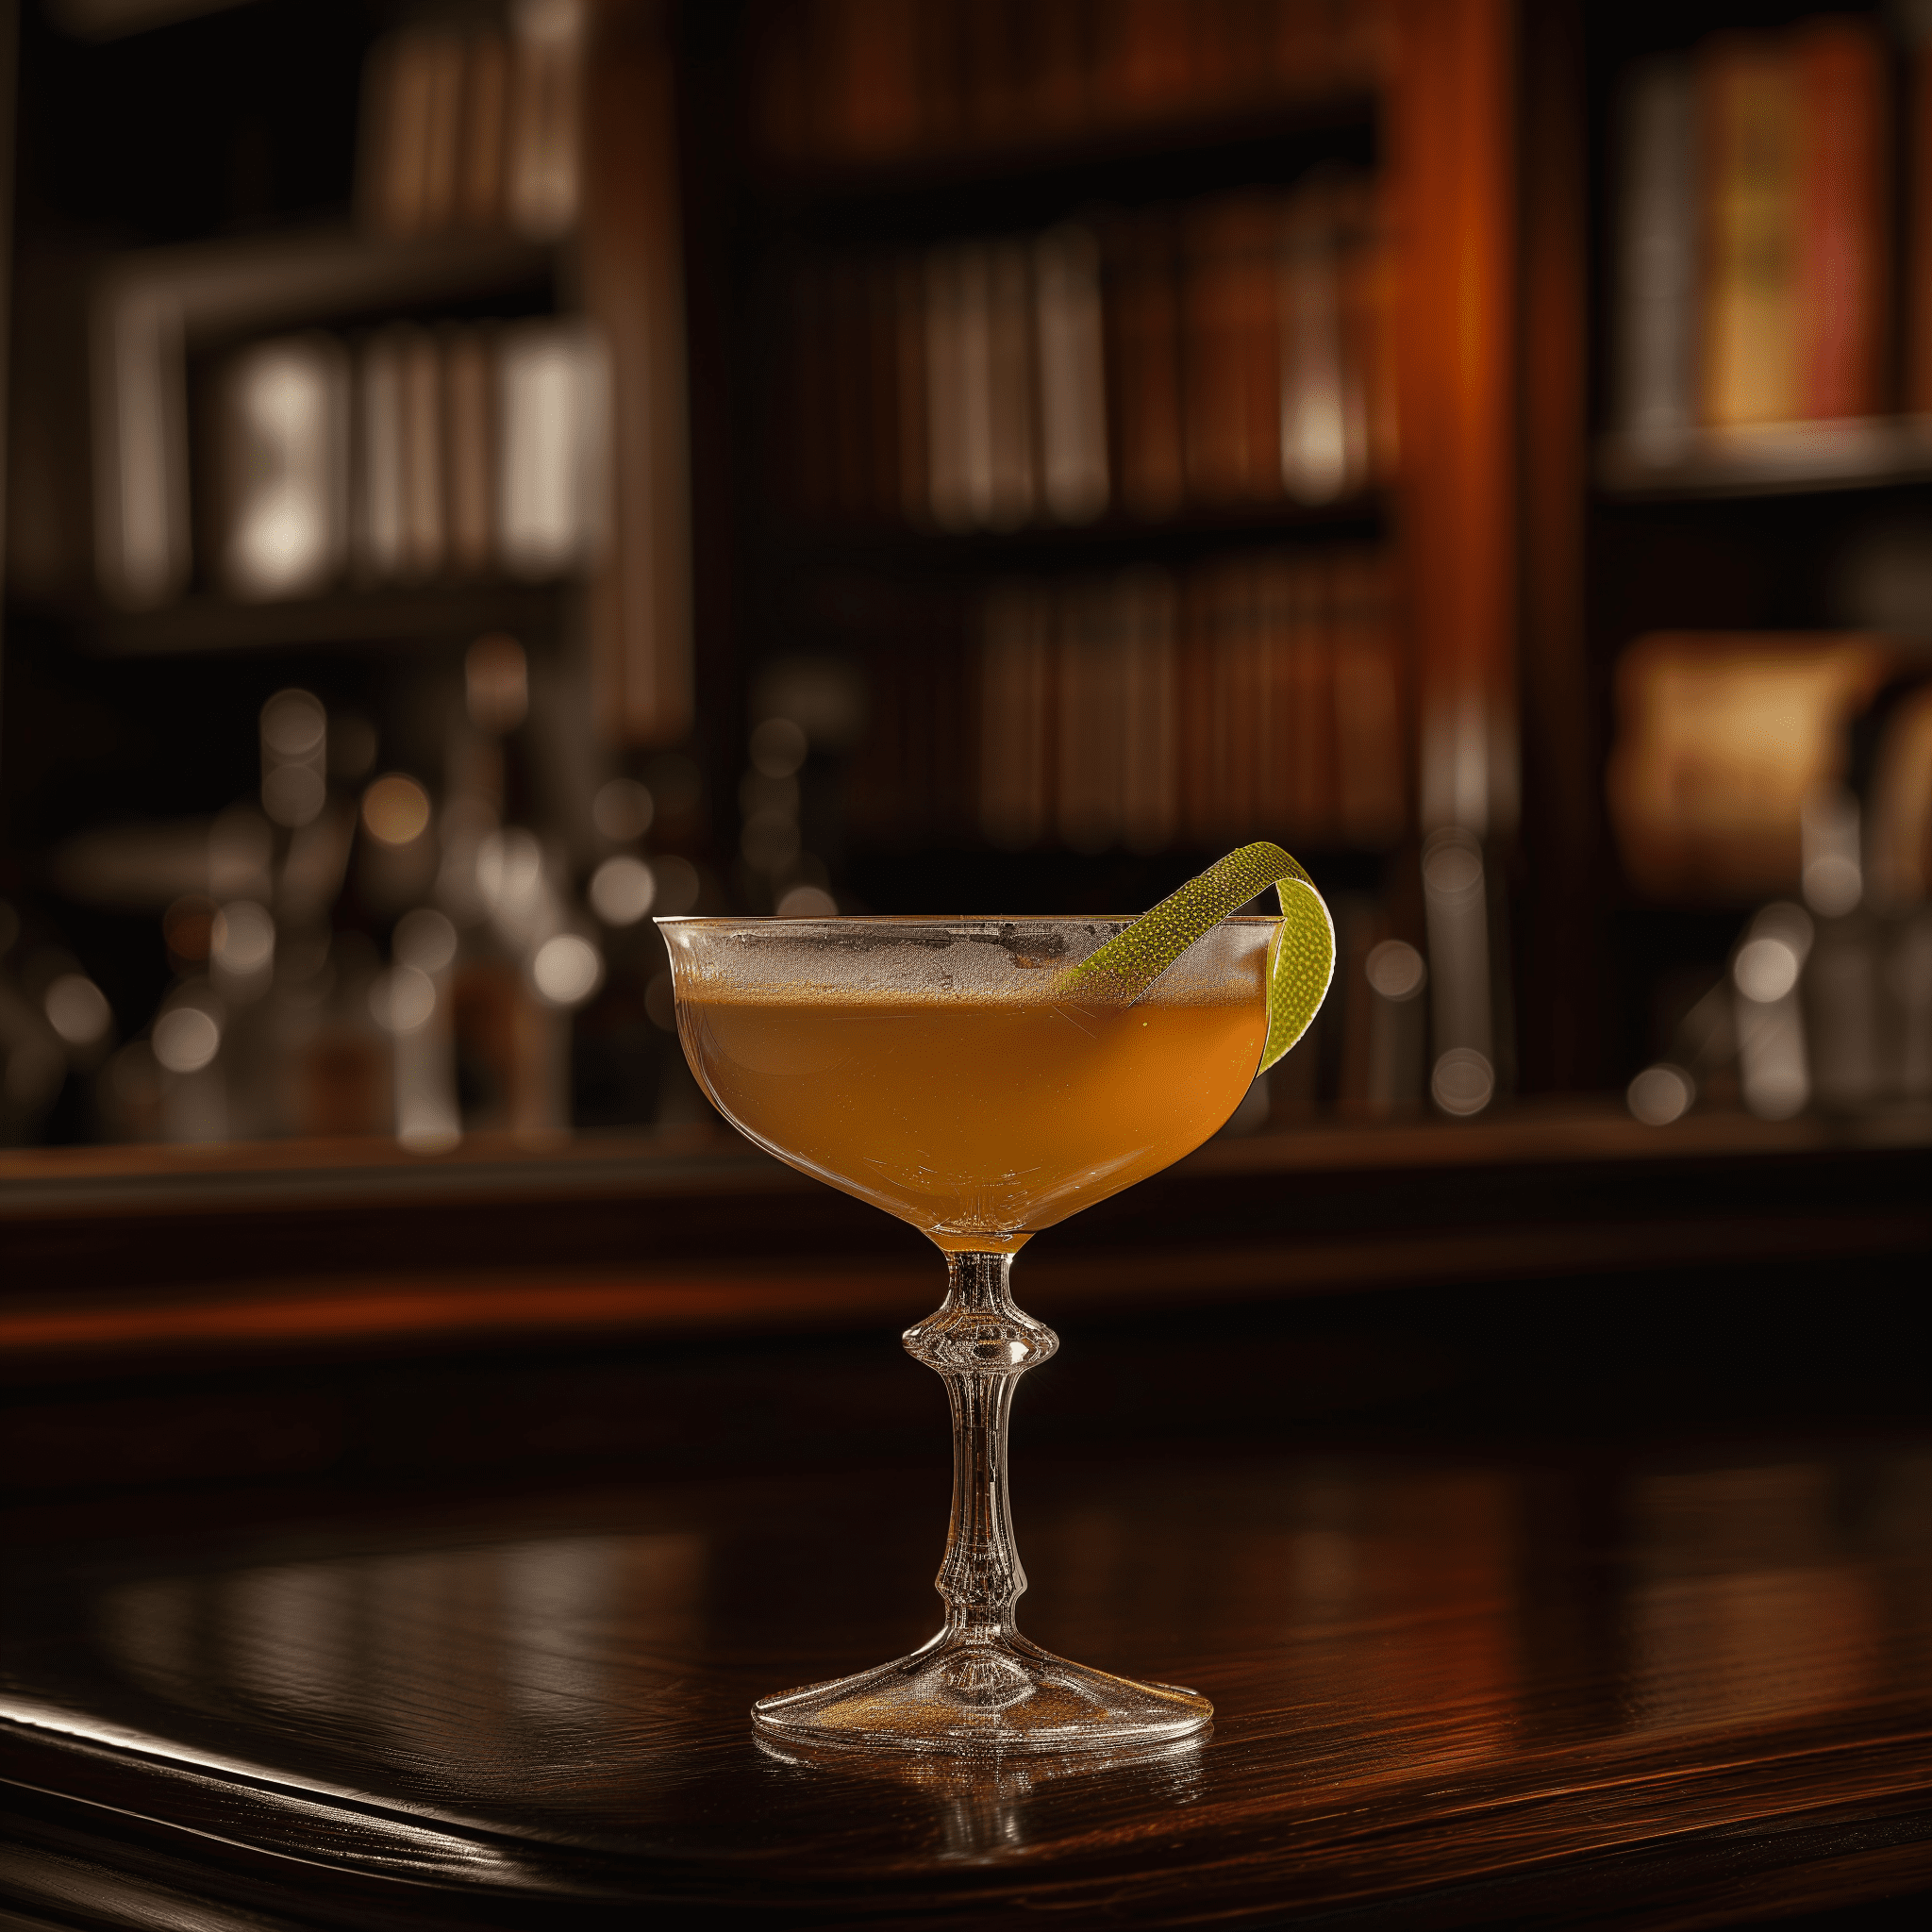 James Joyce Cocktail Recipe - The James Joyce cocktail offers a harmonious blend of sweet, citrus, and herbal notes, with the robustness of Irish whiskey providing a warm, smooth finish. It's a balanced drink with a hint of bitterness from the vermouth, making it sophisticated and complex.